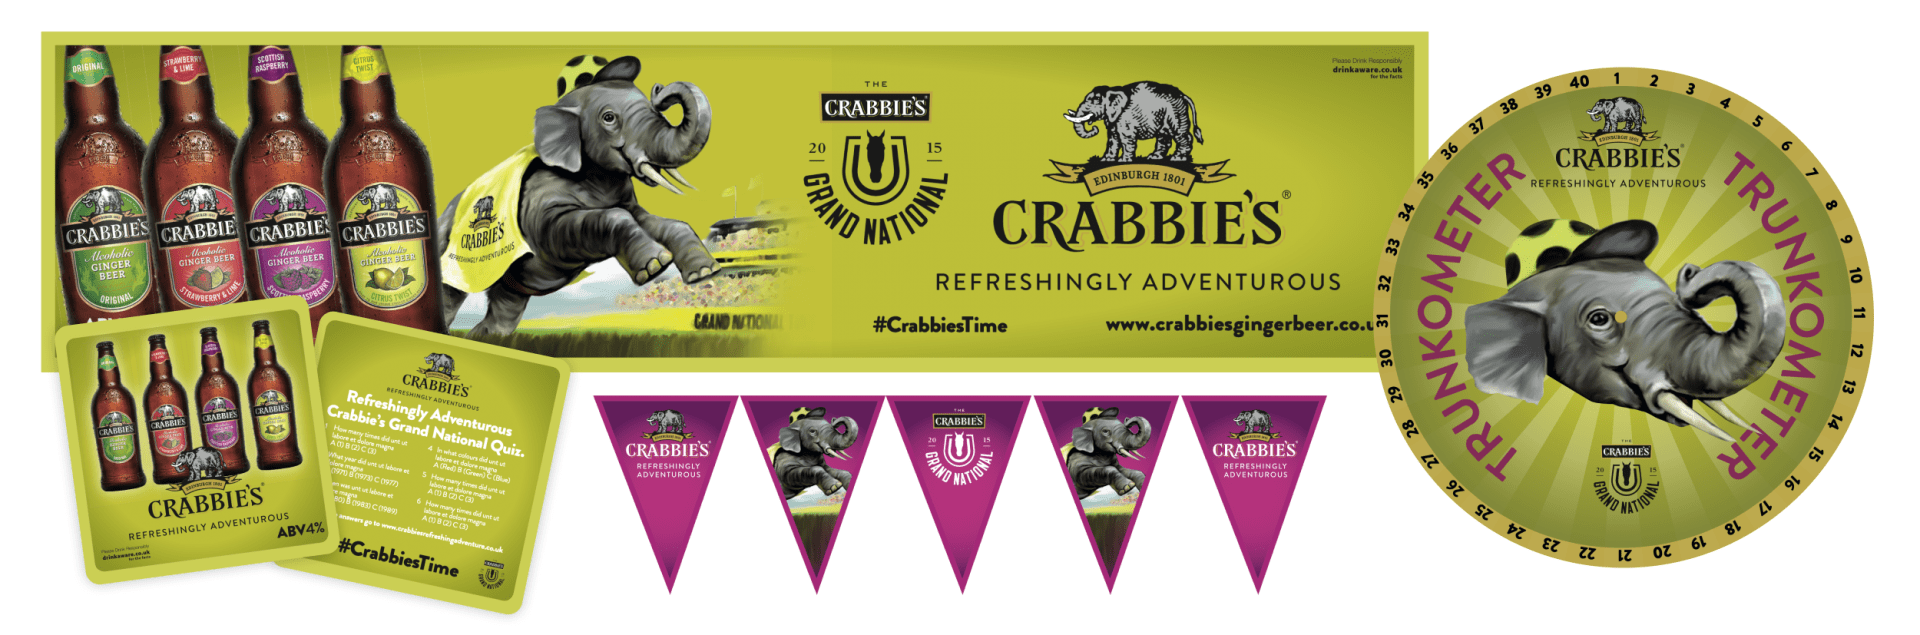 Crabbies Grand National Campaign promotional examples